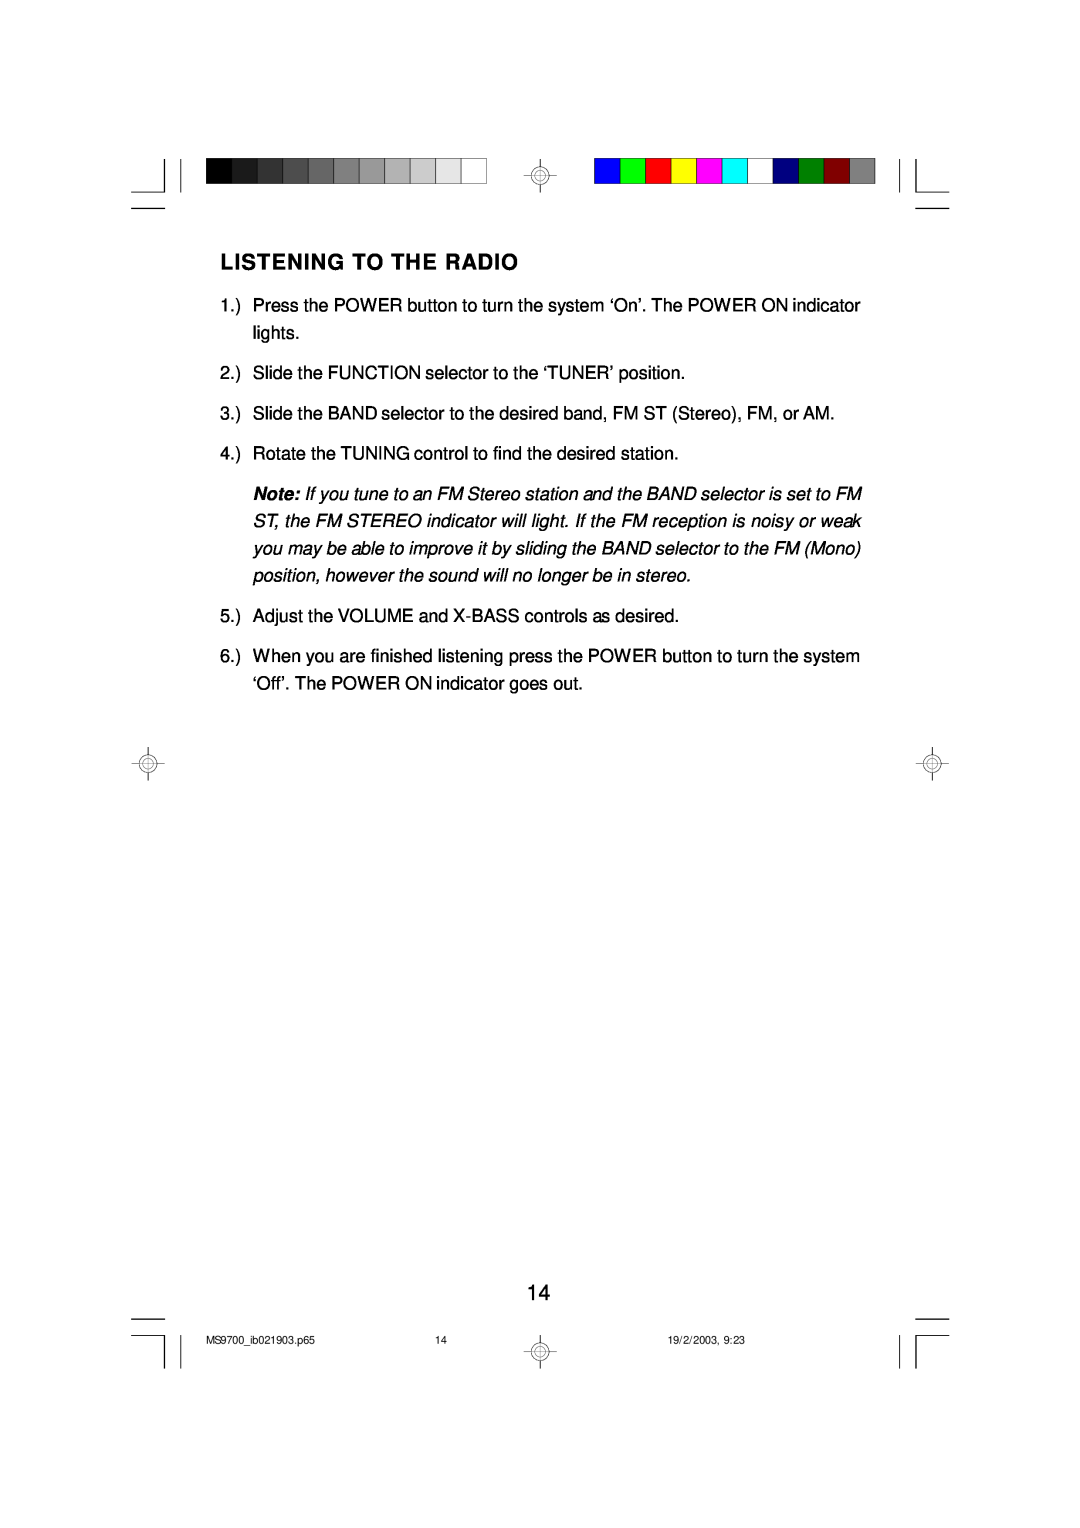 Emerson owner manual Listening To The Radio, MS9700 ib021903.p65, 19/2/2003 